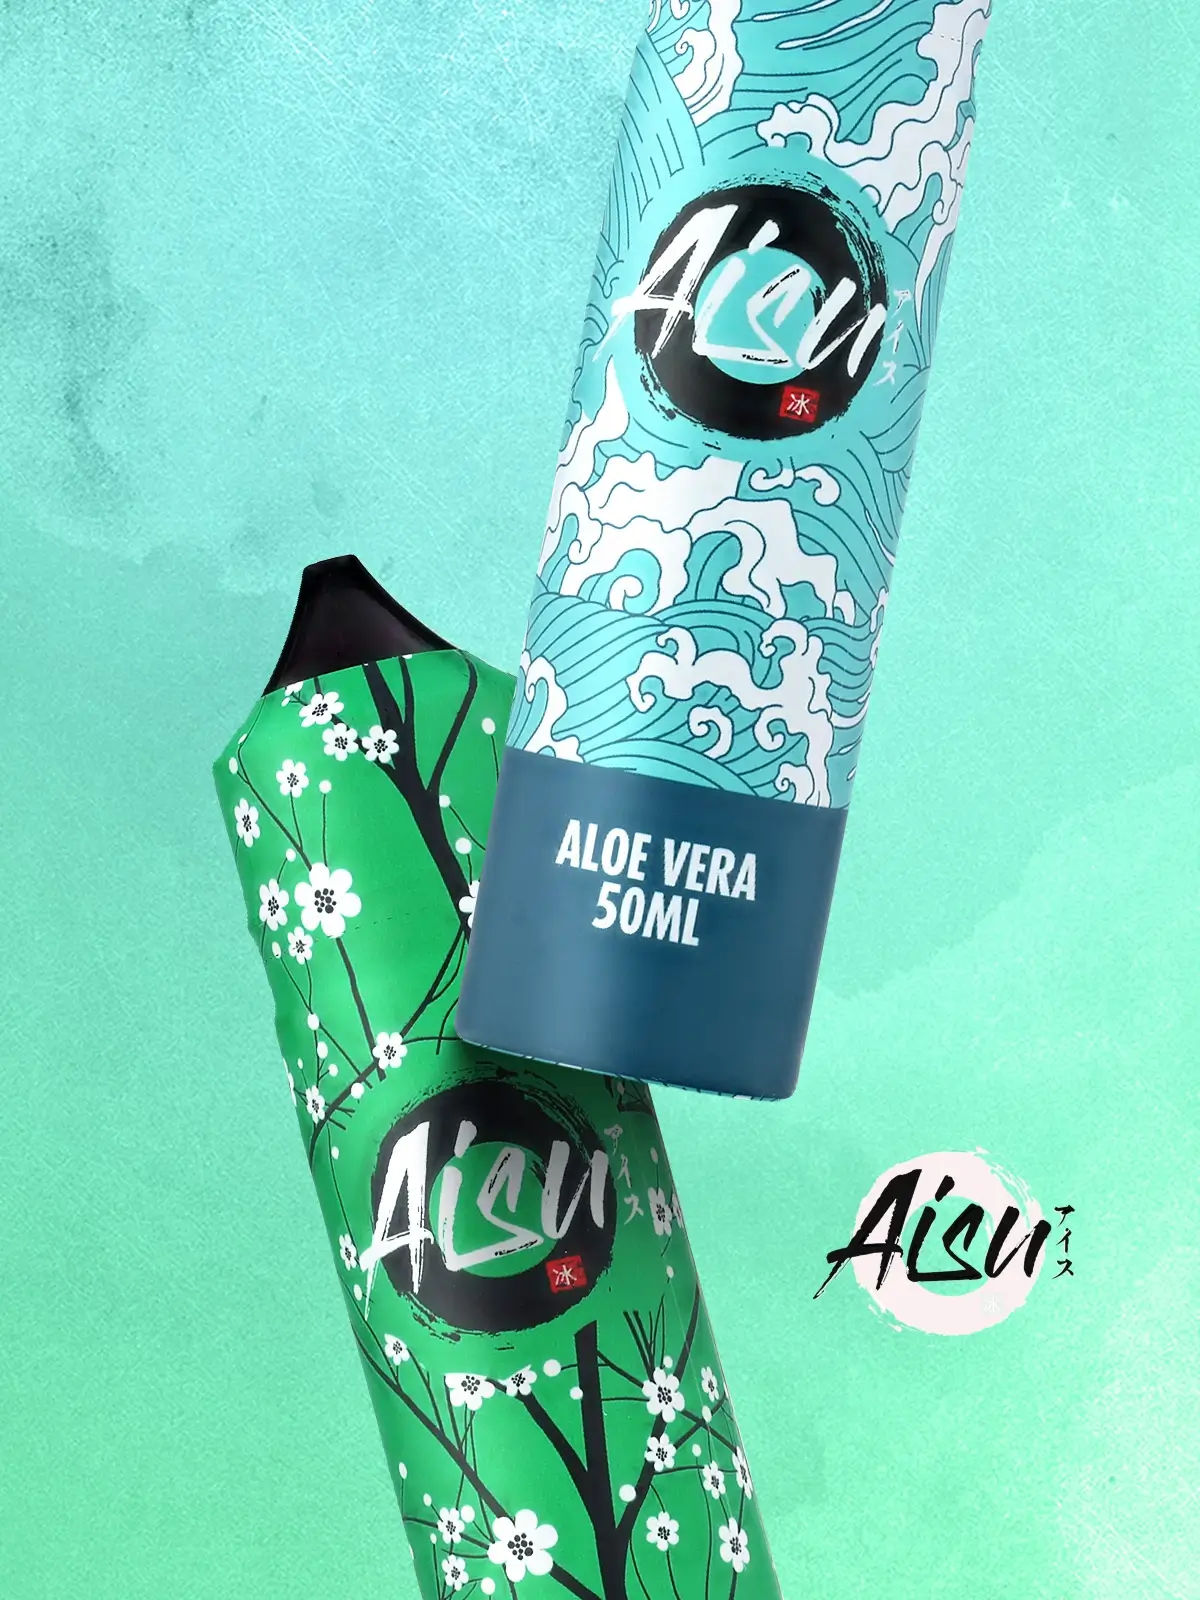 Two zoomed-in bottles of Aisu short fill e-liquid bottles with their signature Japanese-inspired designs, floating in front of a textured teal-coloured background